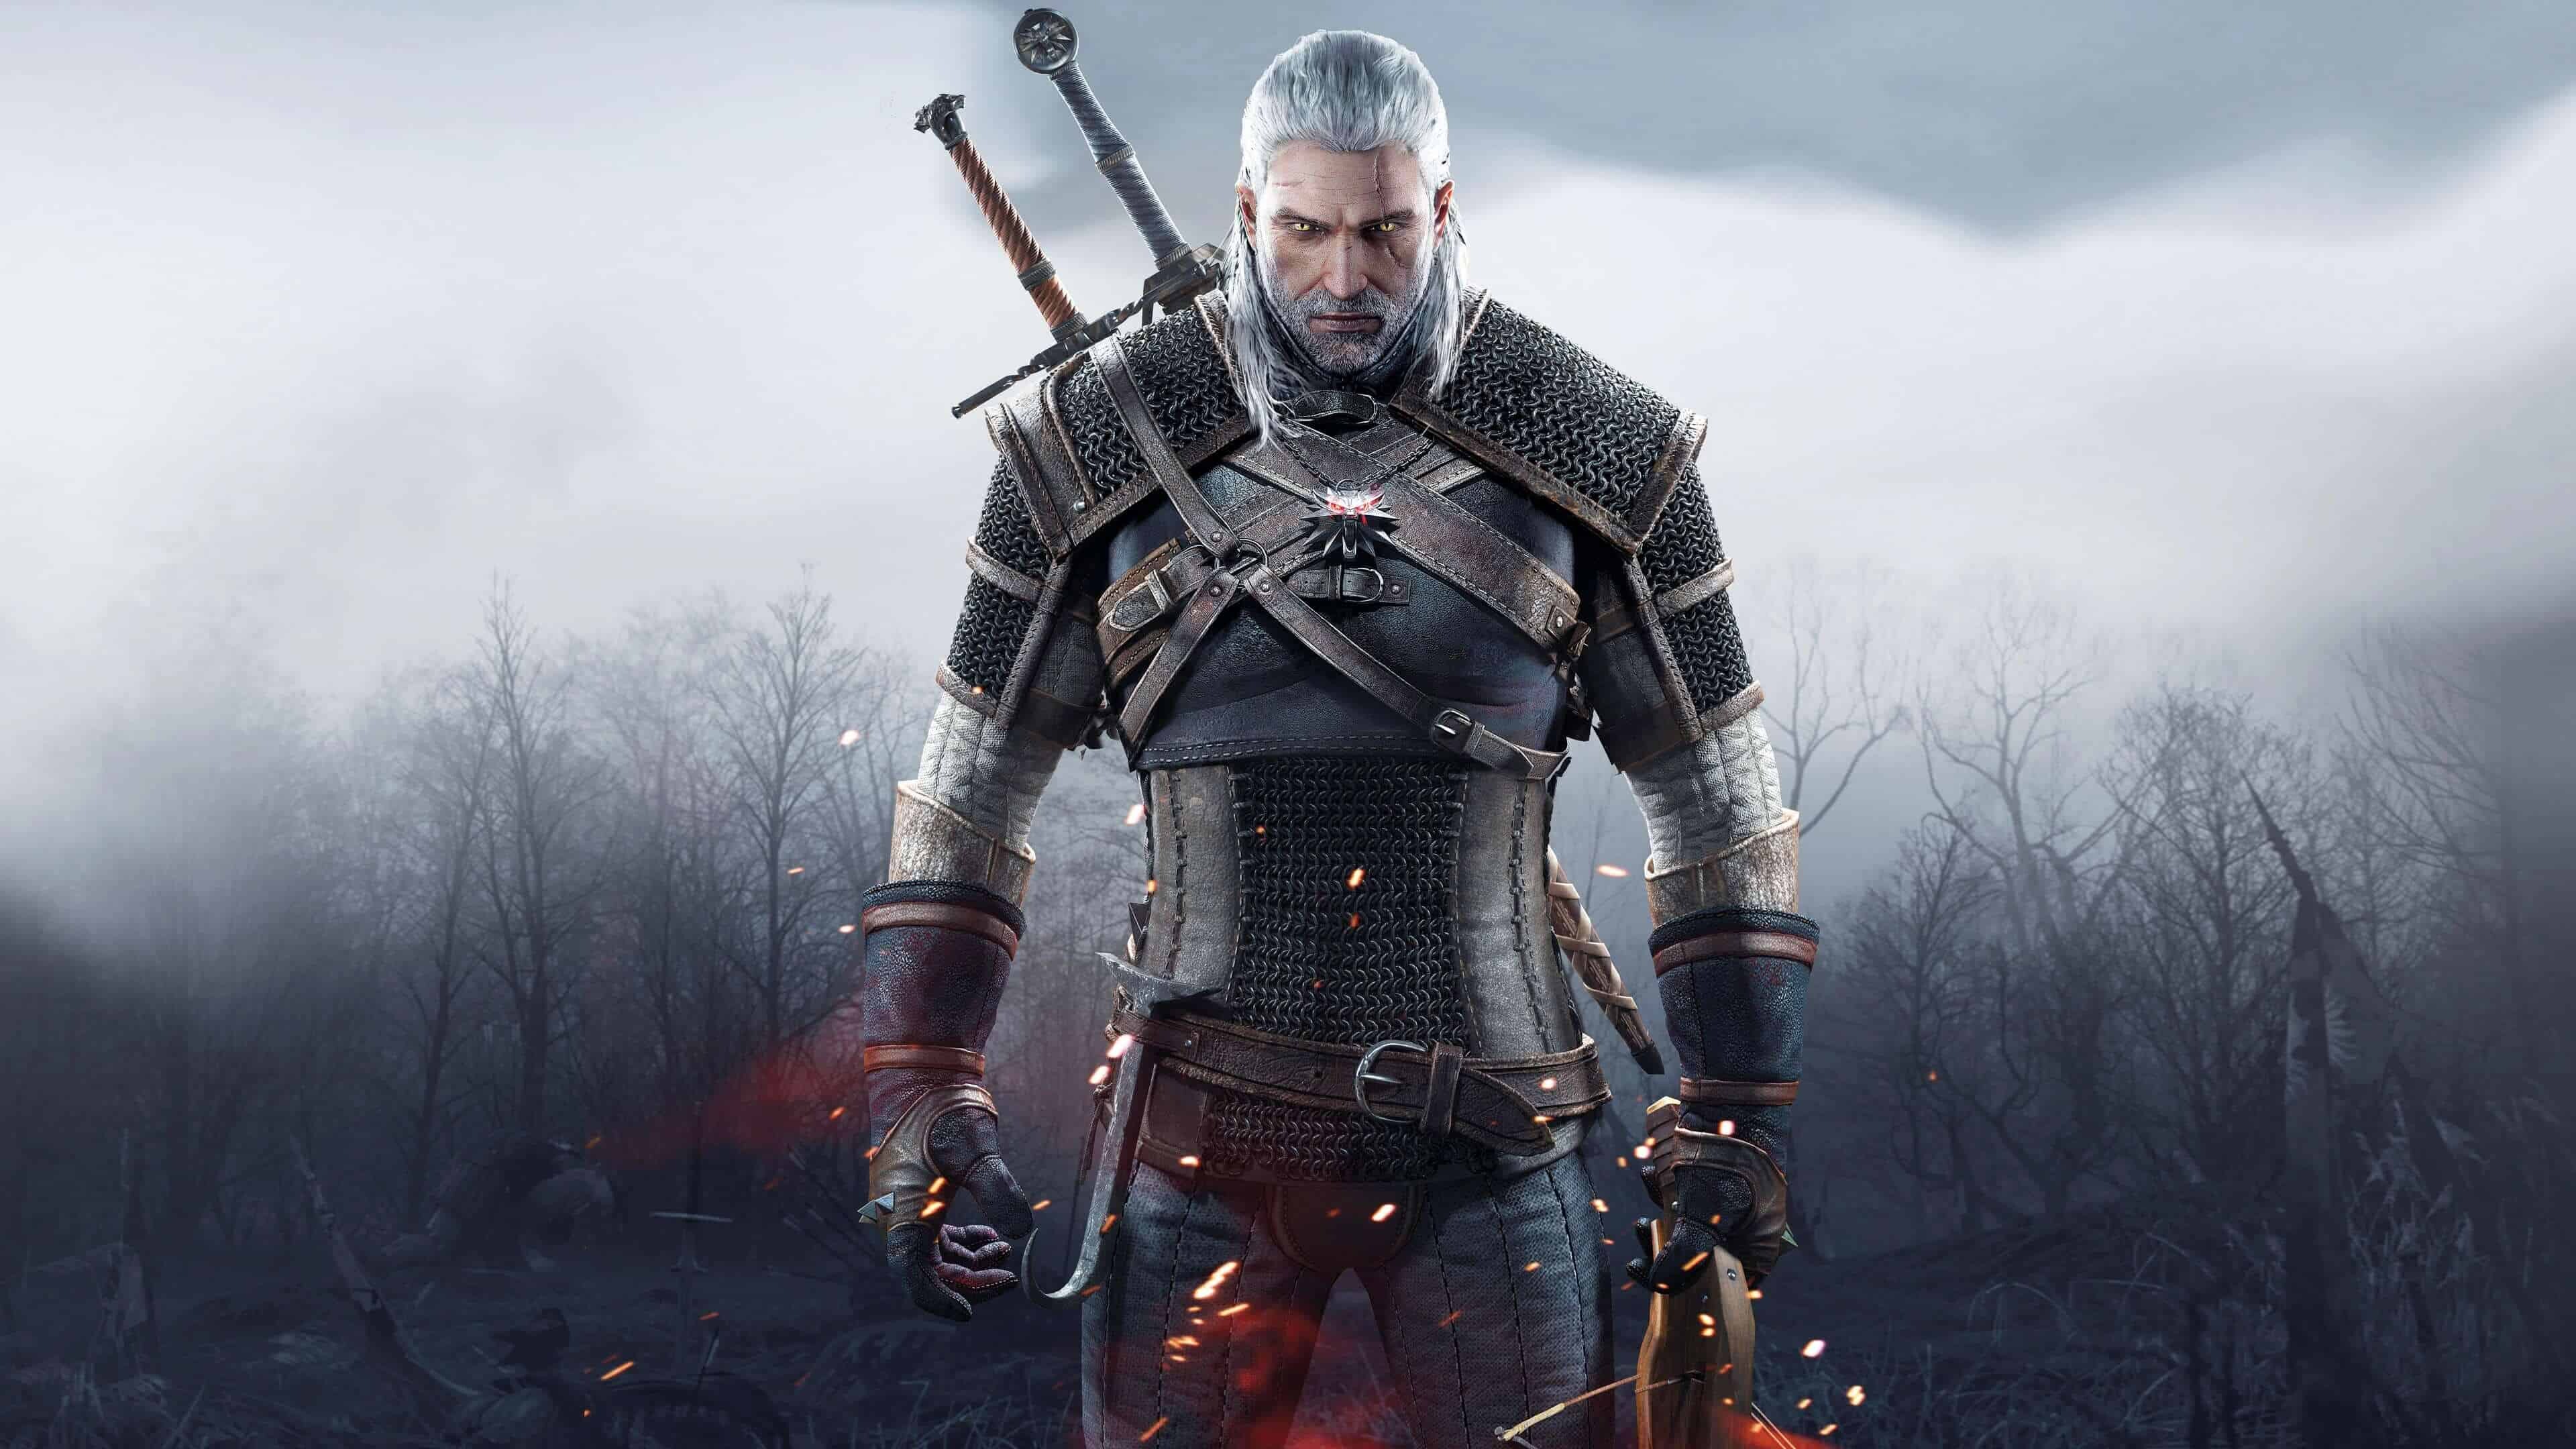 The Witcher (Game): Wild Hunt, Geralt of Rivia, One of the most popular protagonists in gaming today. 3840x2160 4K Wallpaper.